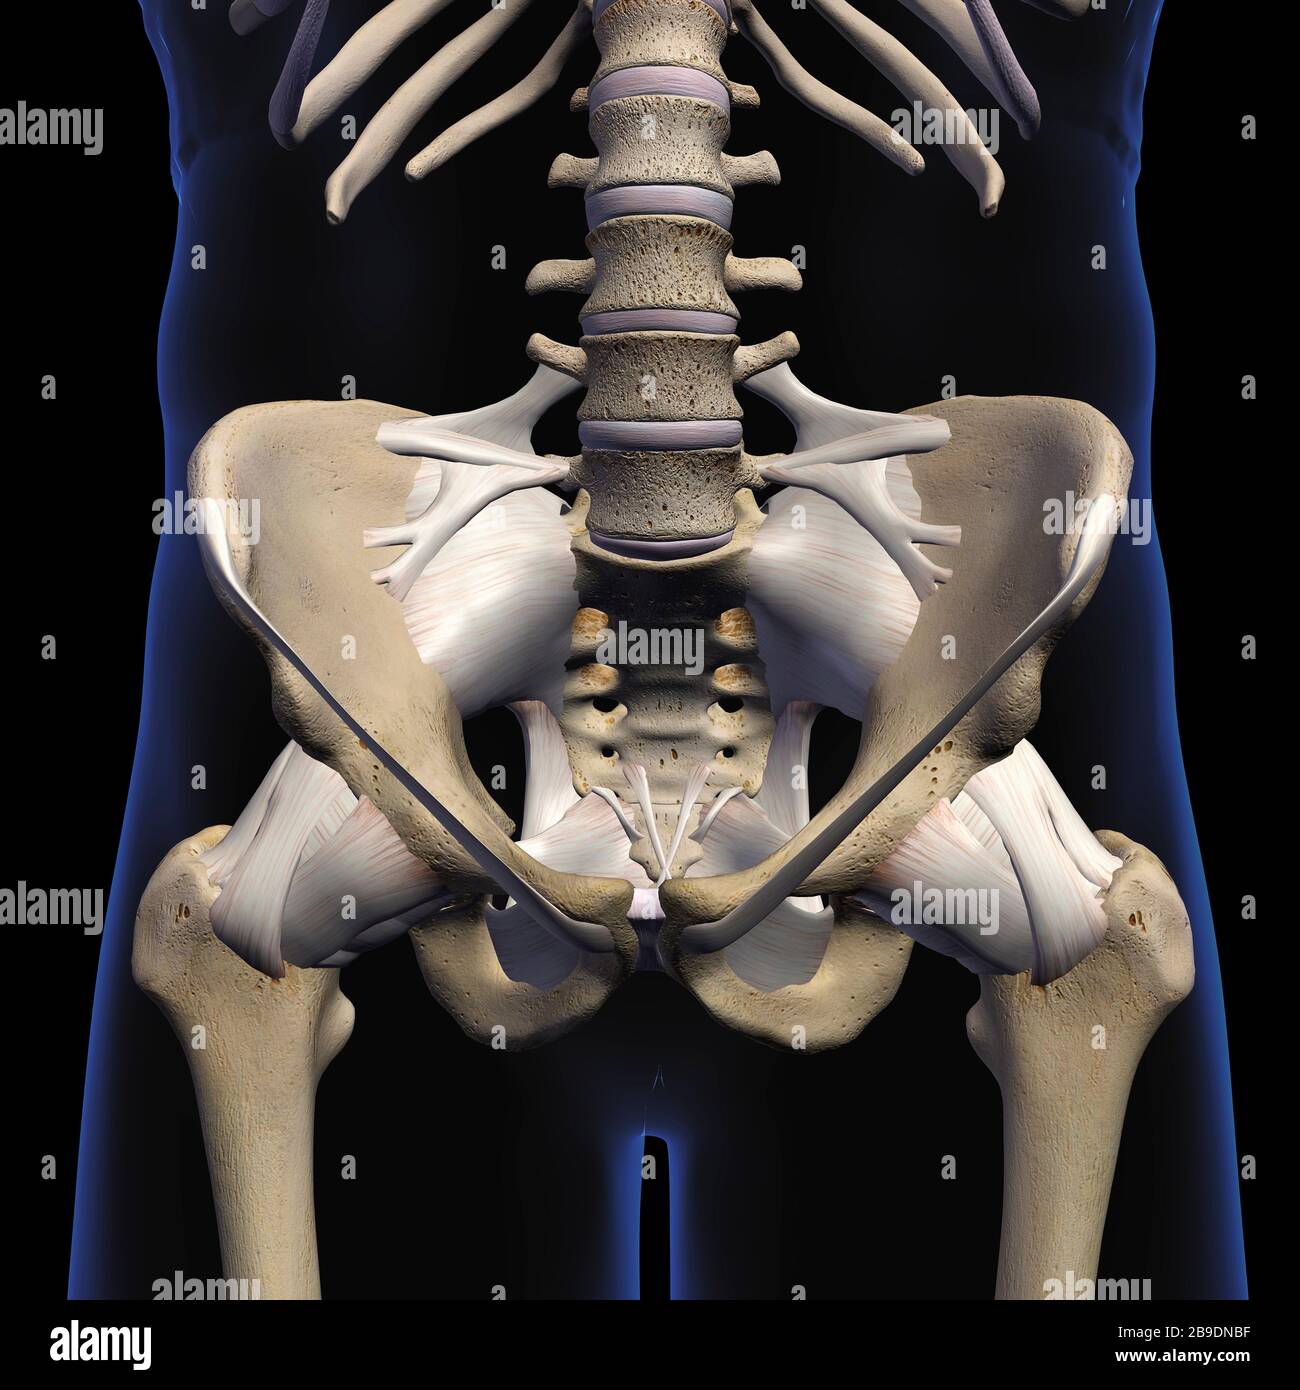 3D rendering of male pelvis, hip, leg bones and ligaments on black background. Stock Photo